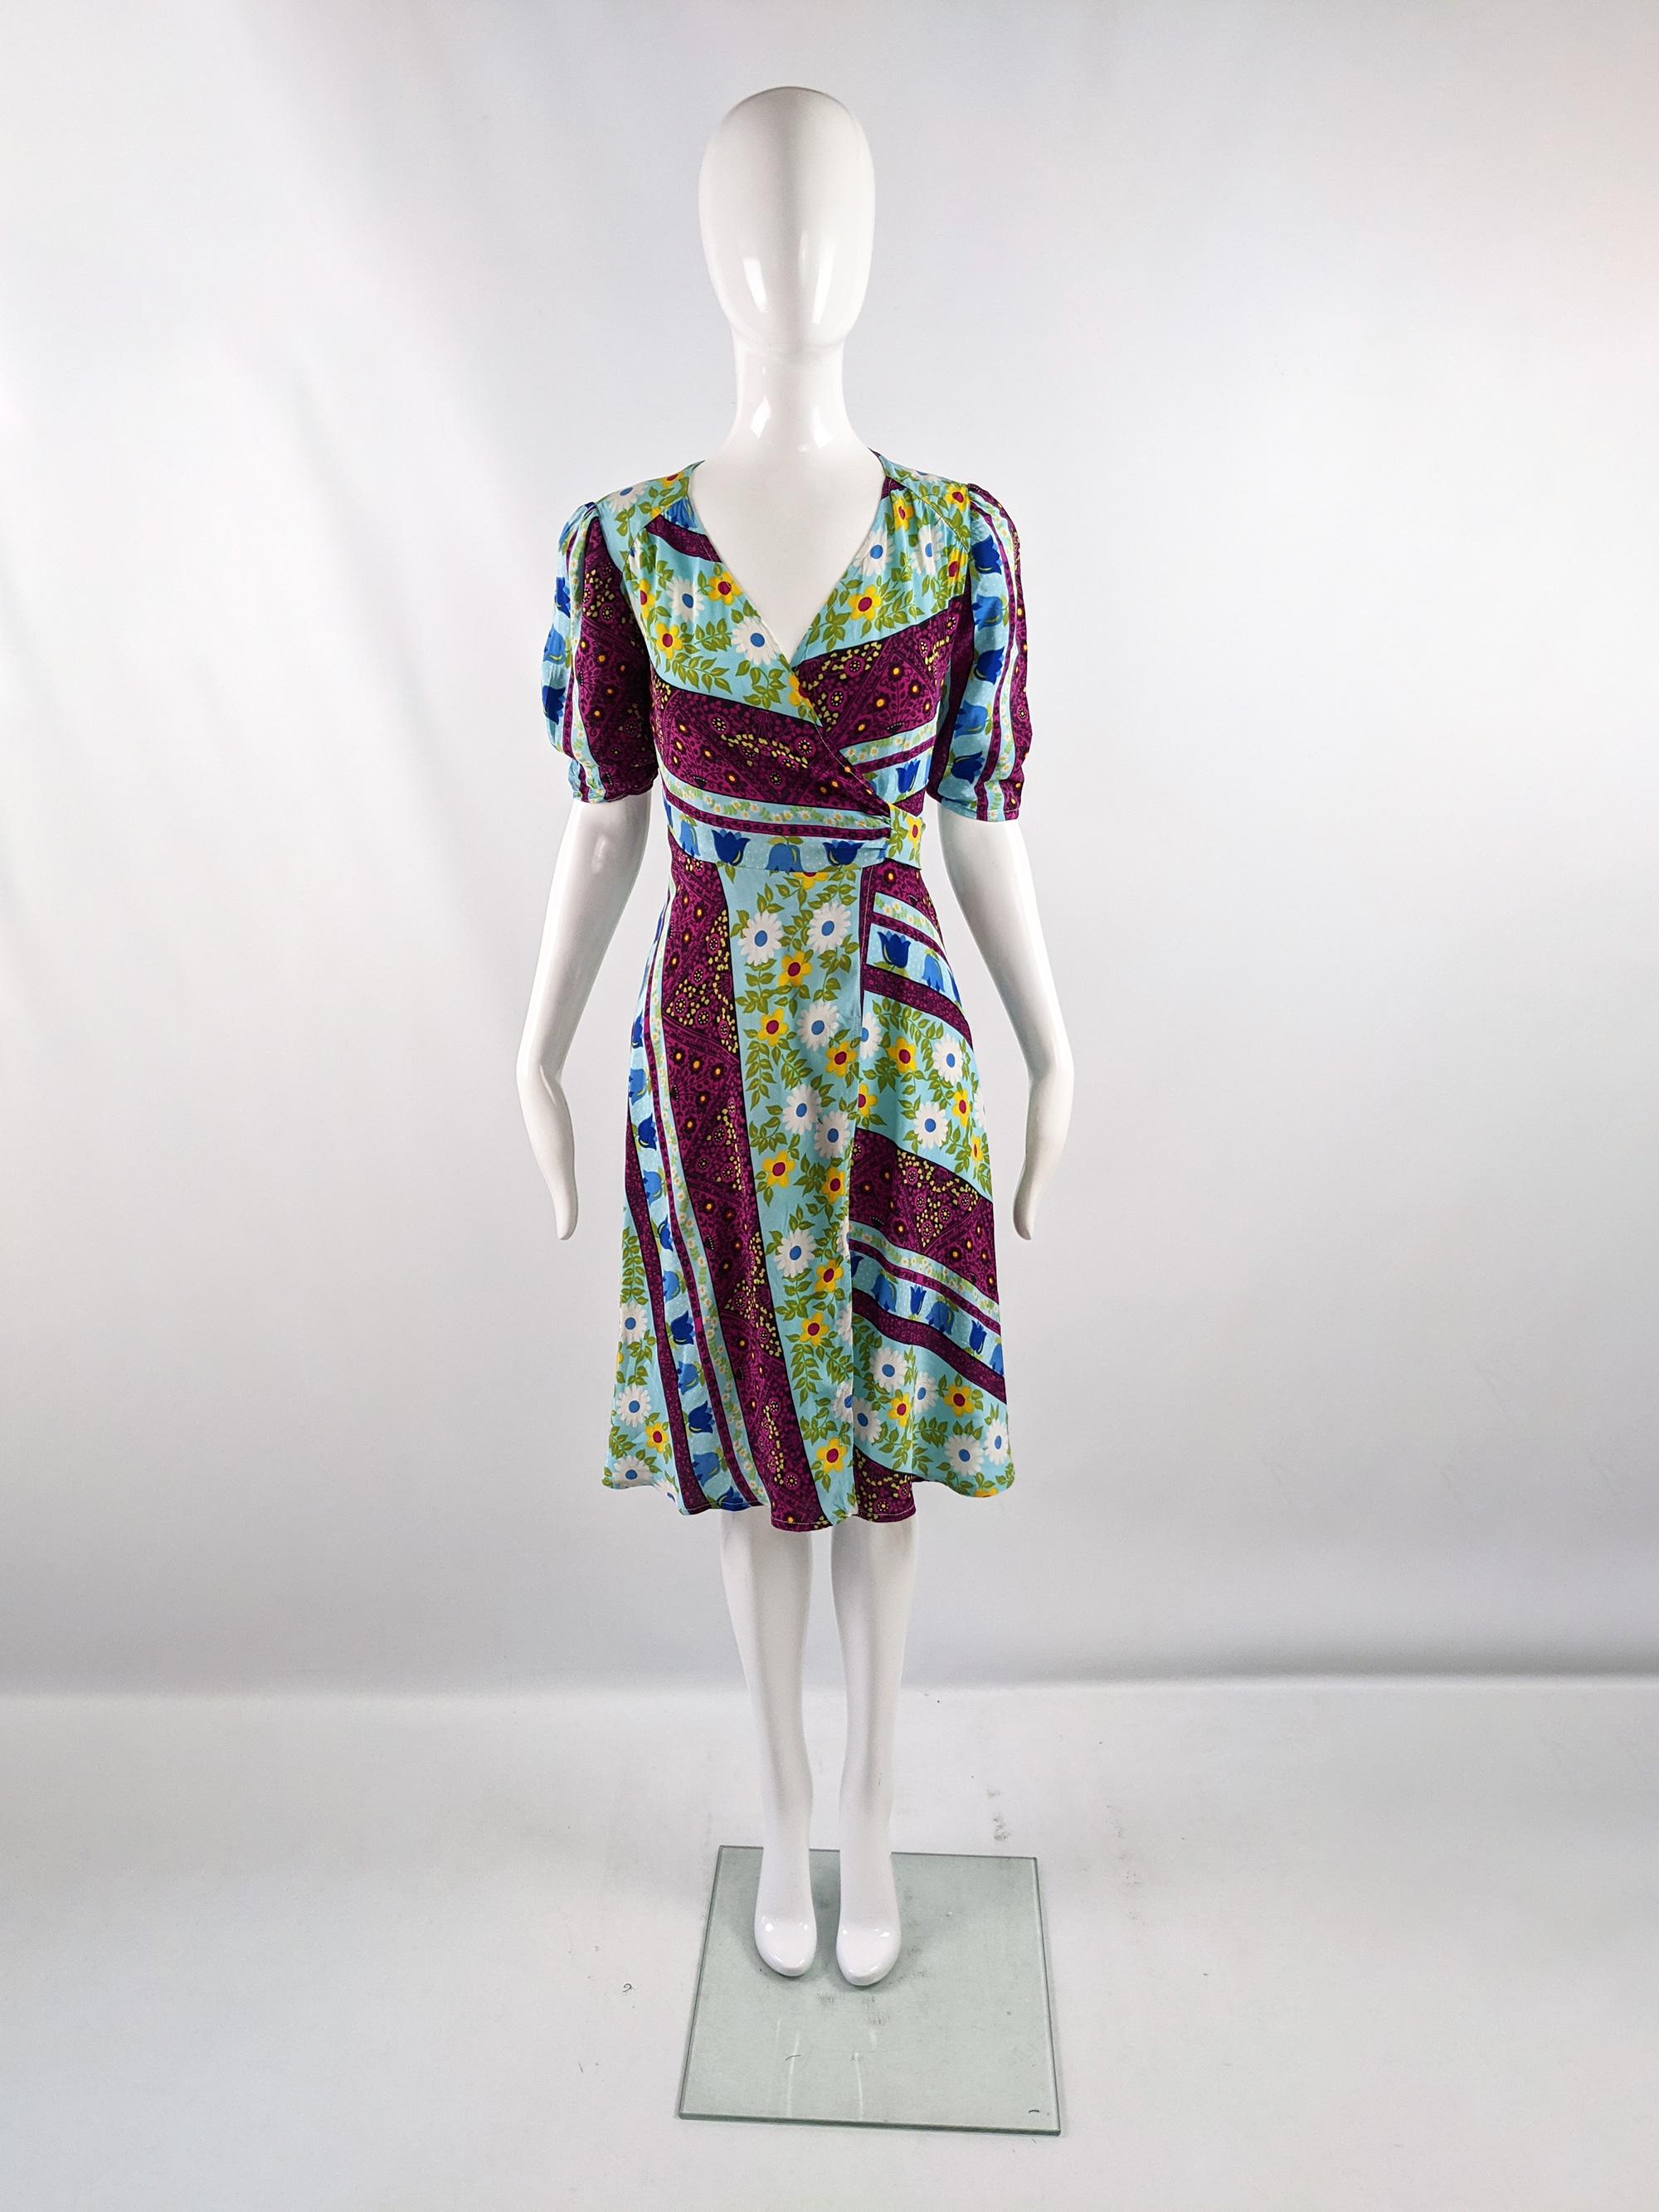 A pretty vintage womens short puff sleeved dress from the 70s by quality British boutique fashion designer, David Silverman. In a brightly multicolored rayon fabric with a bold bohemian floral print design throughout. Perfect for a festival or for